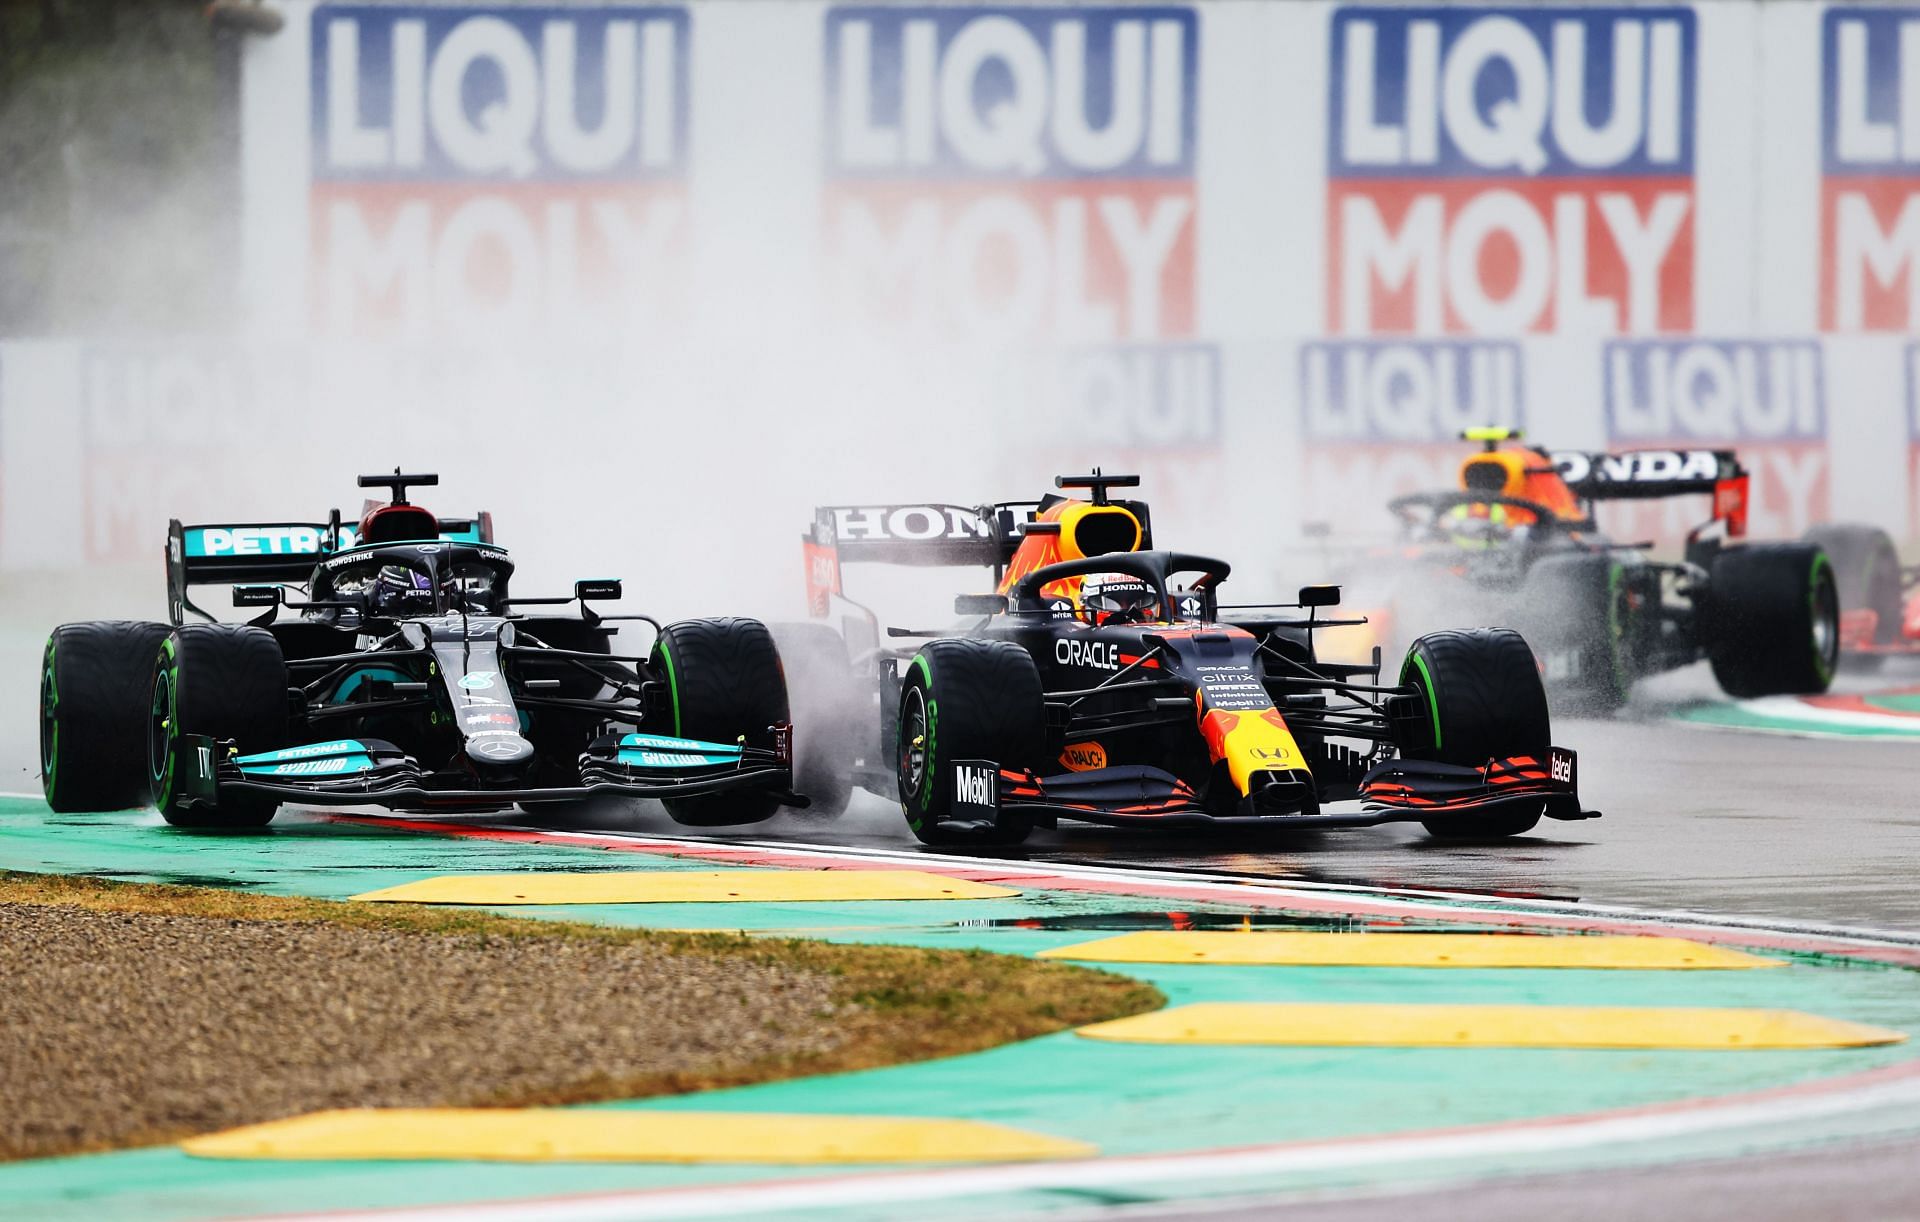 Lewis Hamilton (left) and Max Verstappen (right) at the Emilia Romagna Grand Prix. Photo by Bryn Lennon/Getty Images)